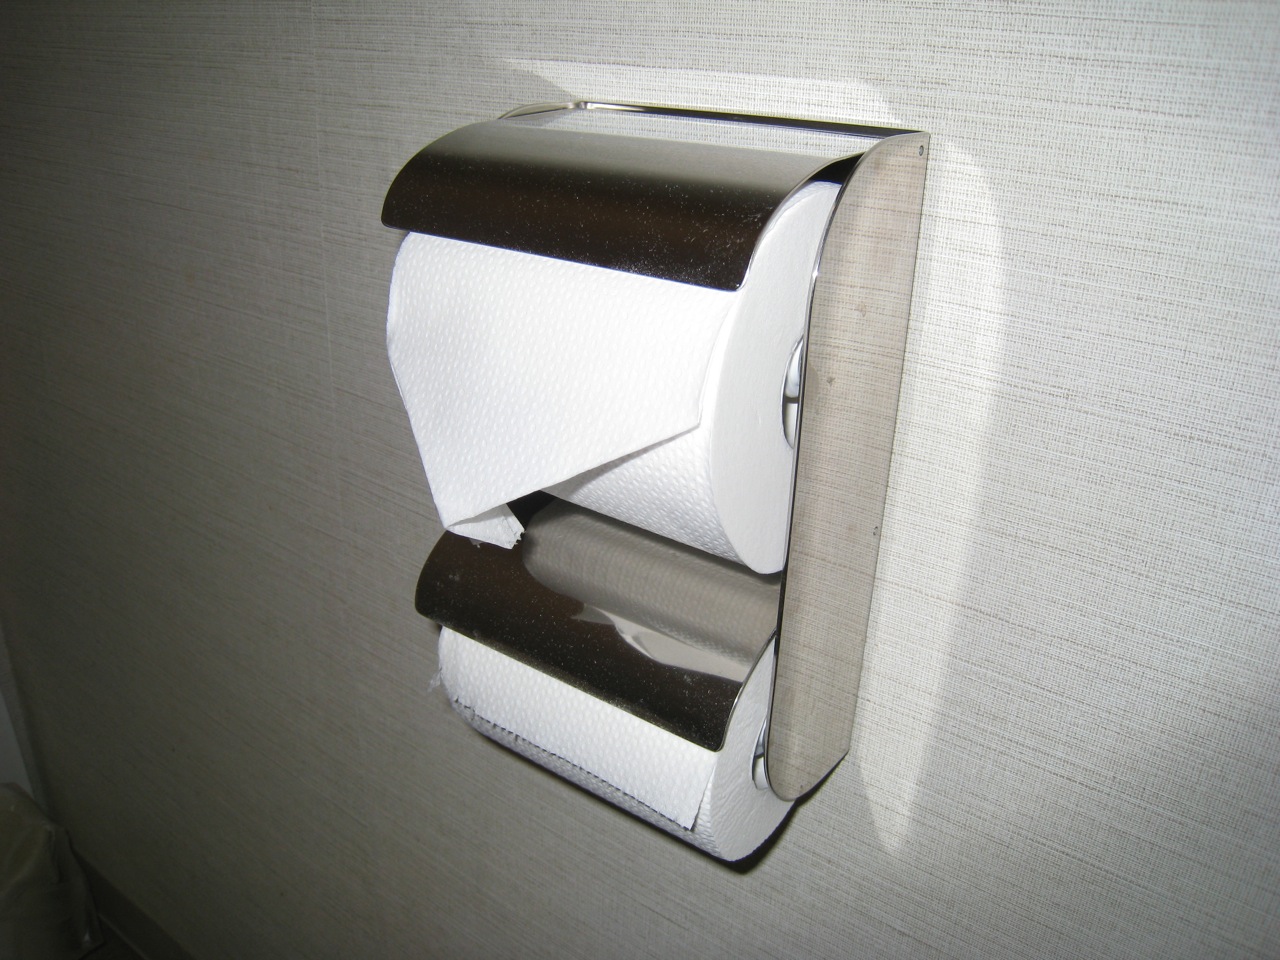 a roll of toilet paper is taped to a metal holder